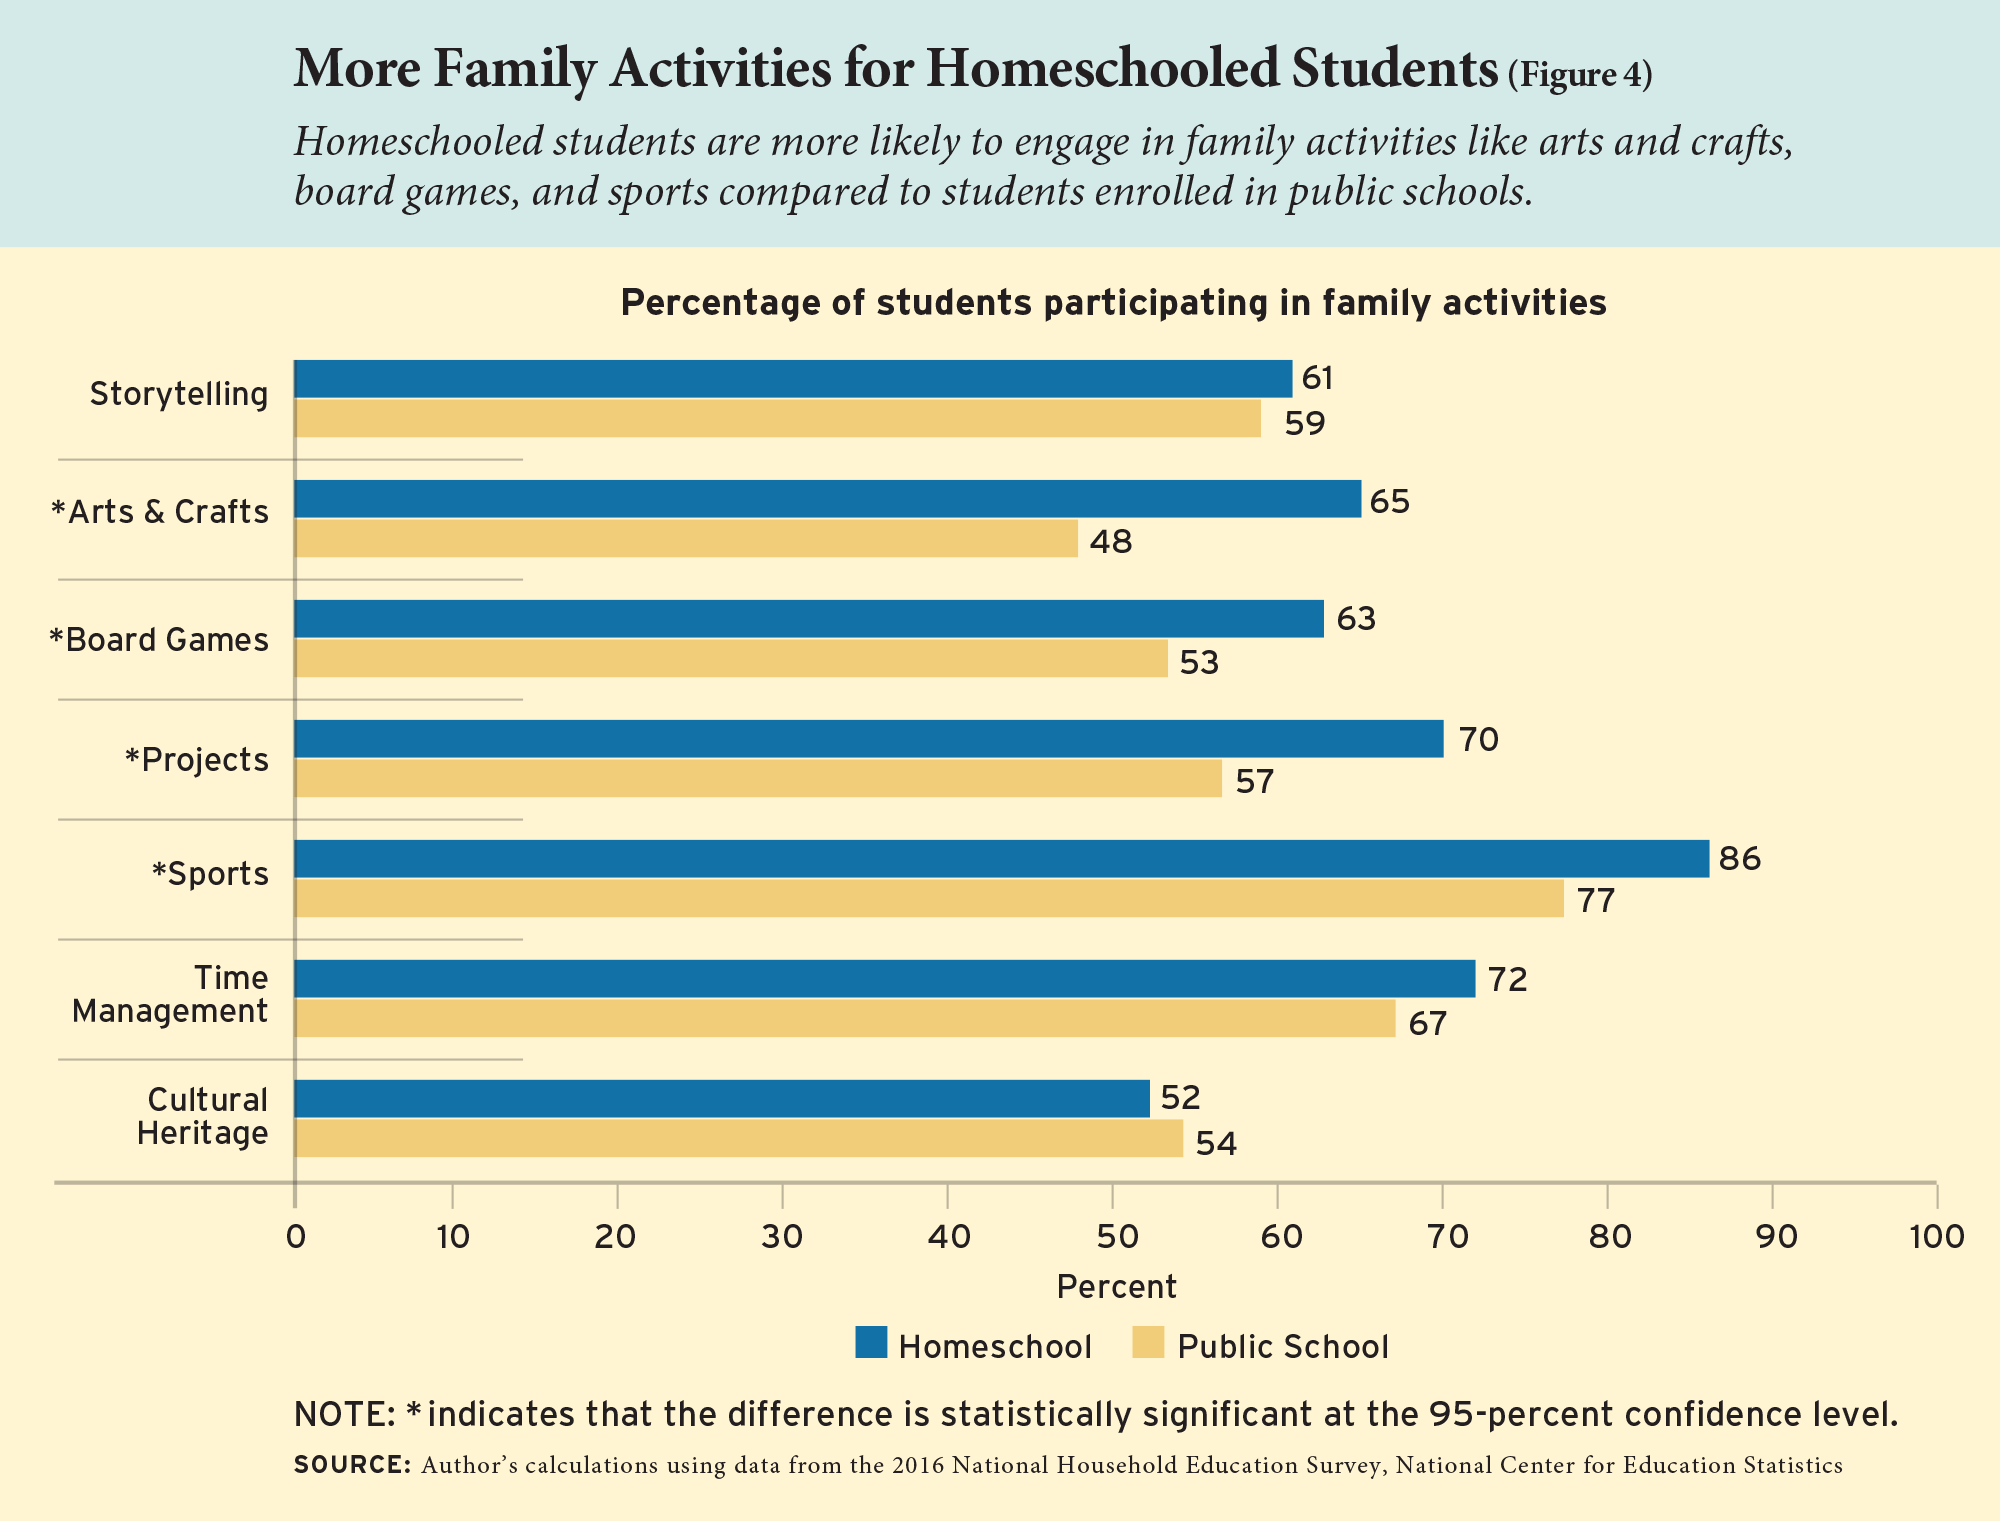 Figure 4: More Family Activities for Homeschooled Students